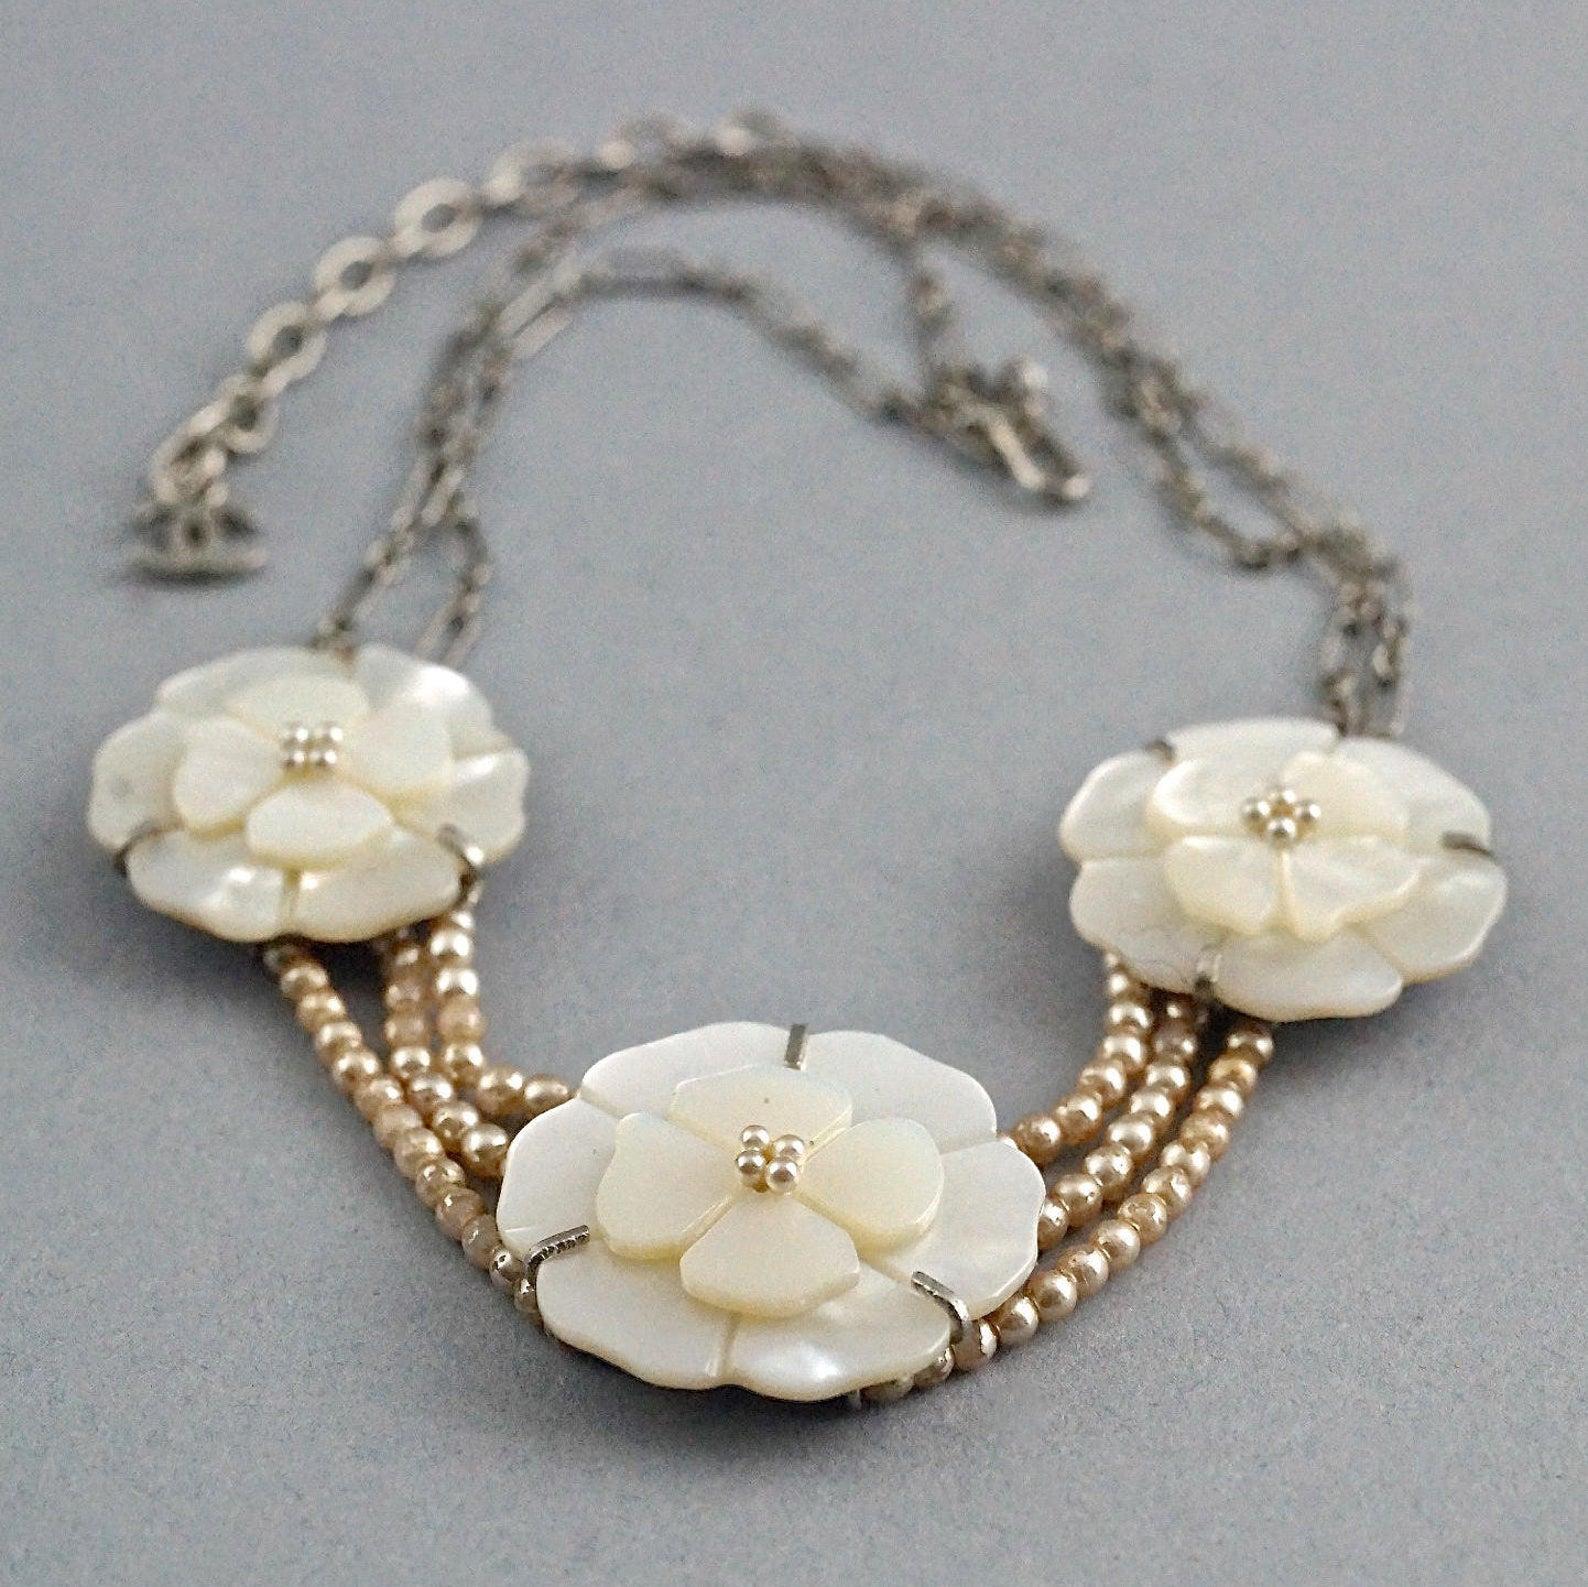 Vintage CHANEL Camellia Mother of Pearl Flower Multi Strand Necklace

Measurements:
Large Camellia: 1.10 inches (3.1 cm)
Small Camellia: 1.06 inches (2.7 cm)
Length: 13.97 inches to 16.14 inches (35.5 cm to 41 cm)

Features:
- 100% Authentic